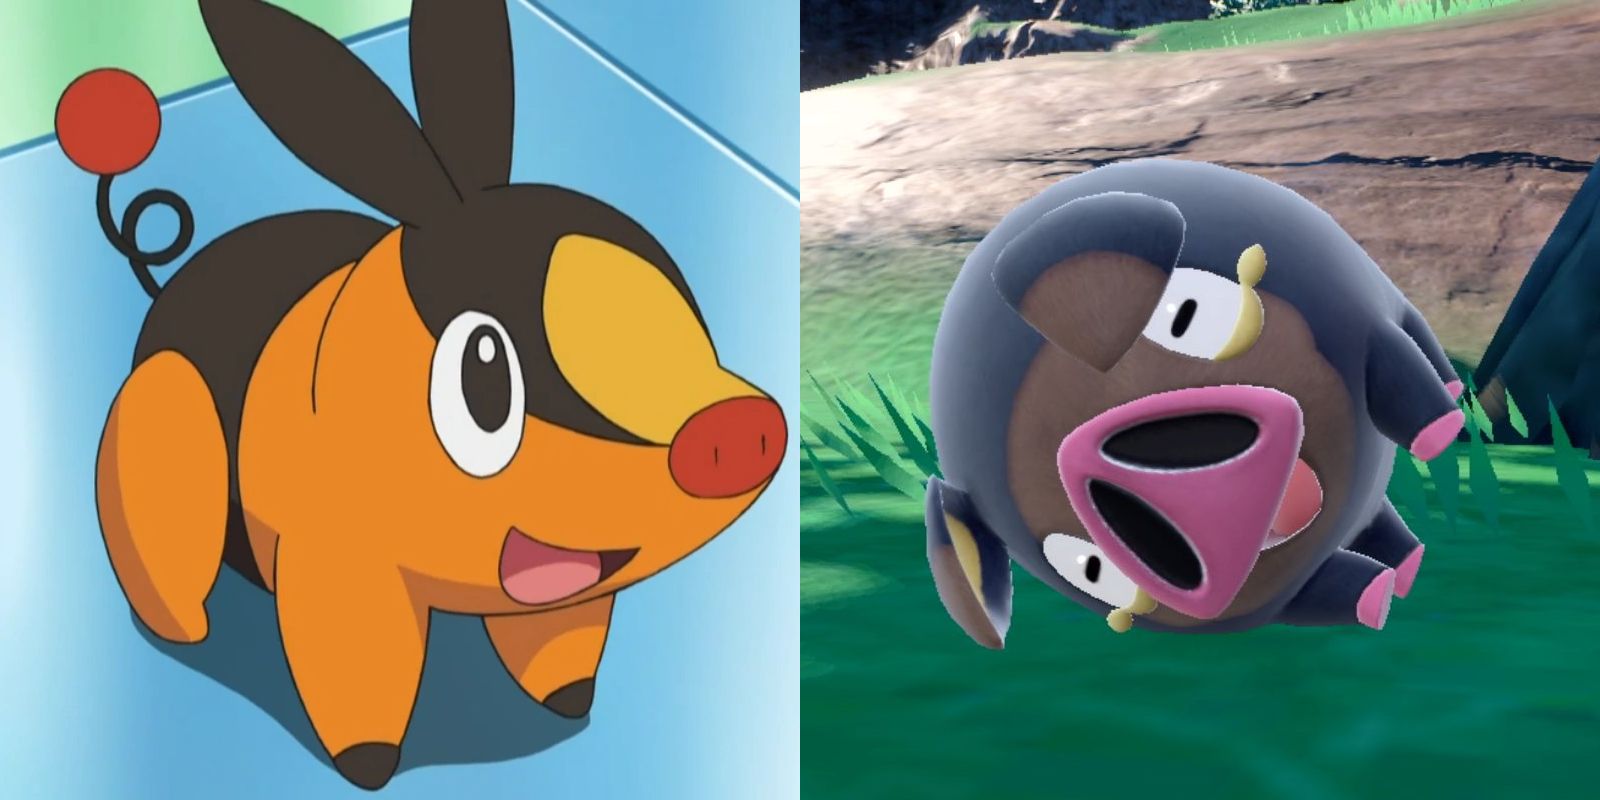 Pokemon Lechonk and Tepig